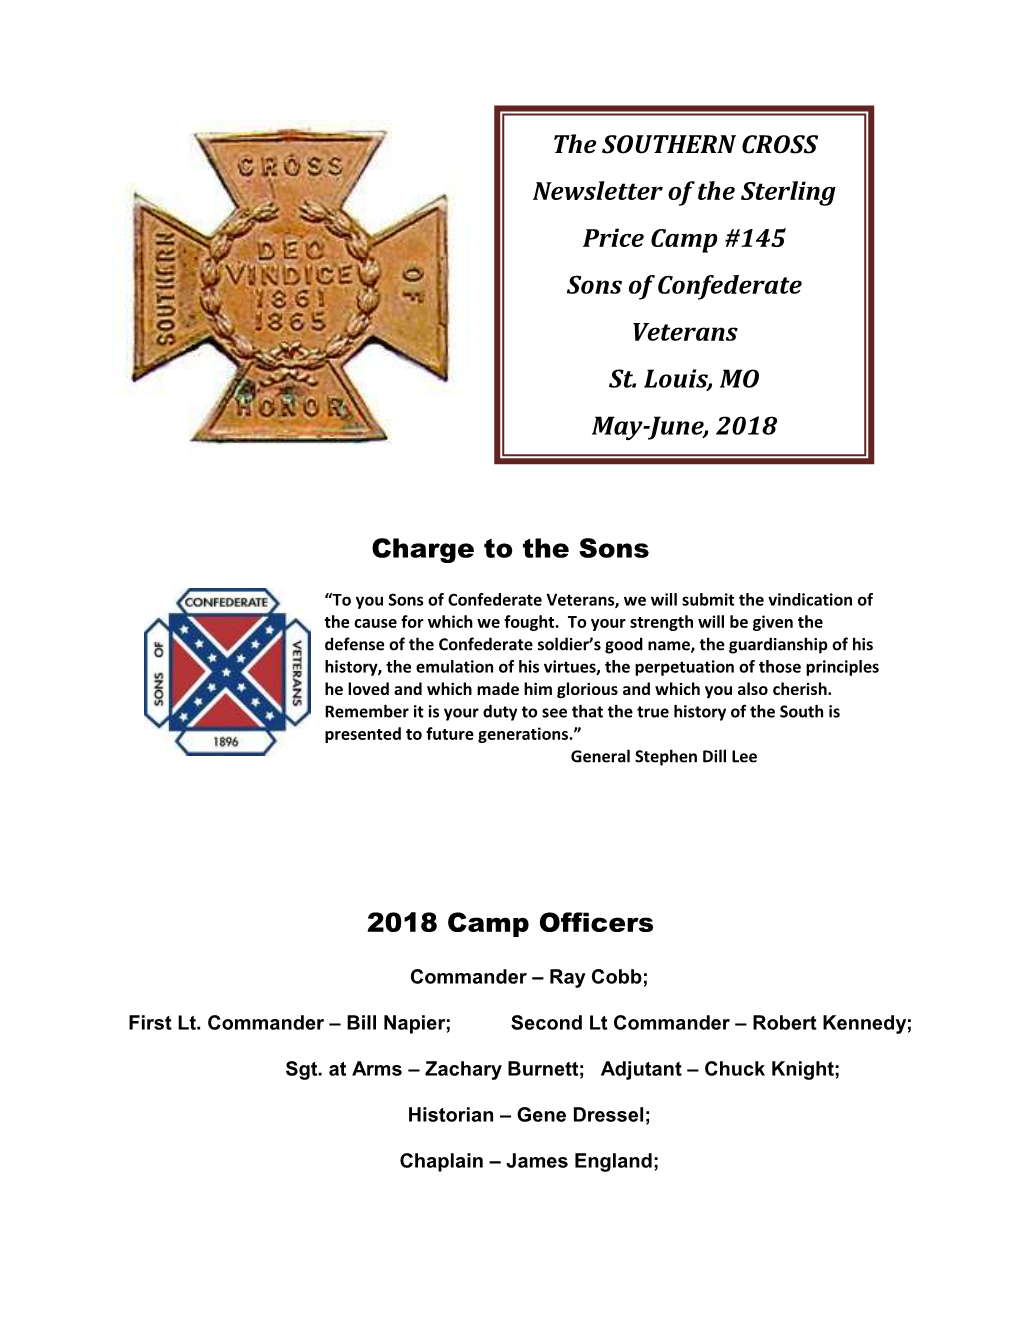 Charge to the Sons 2018 Camp Officers the SOUTHERN CROSS